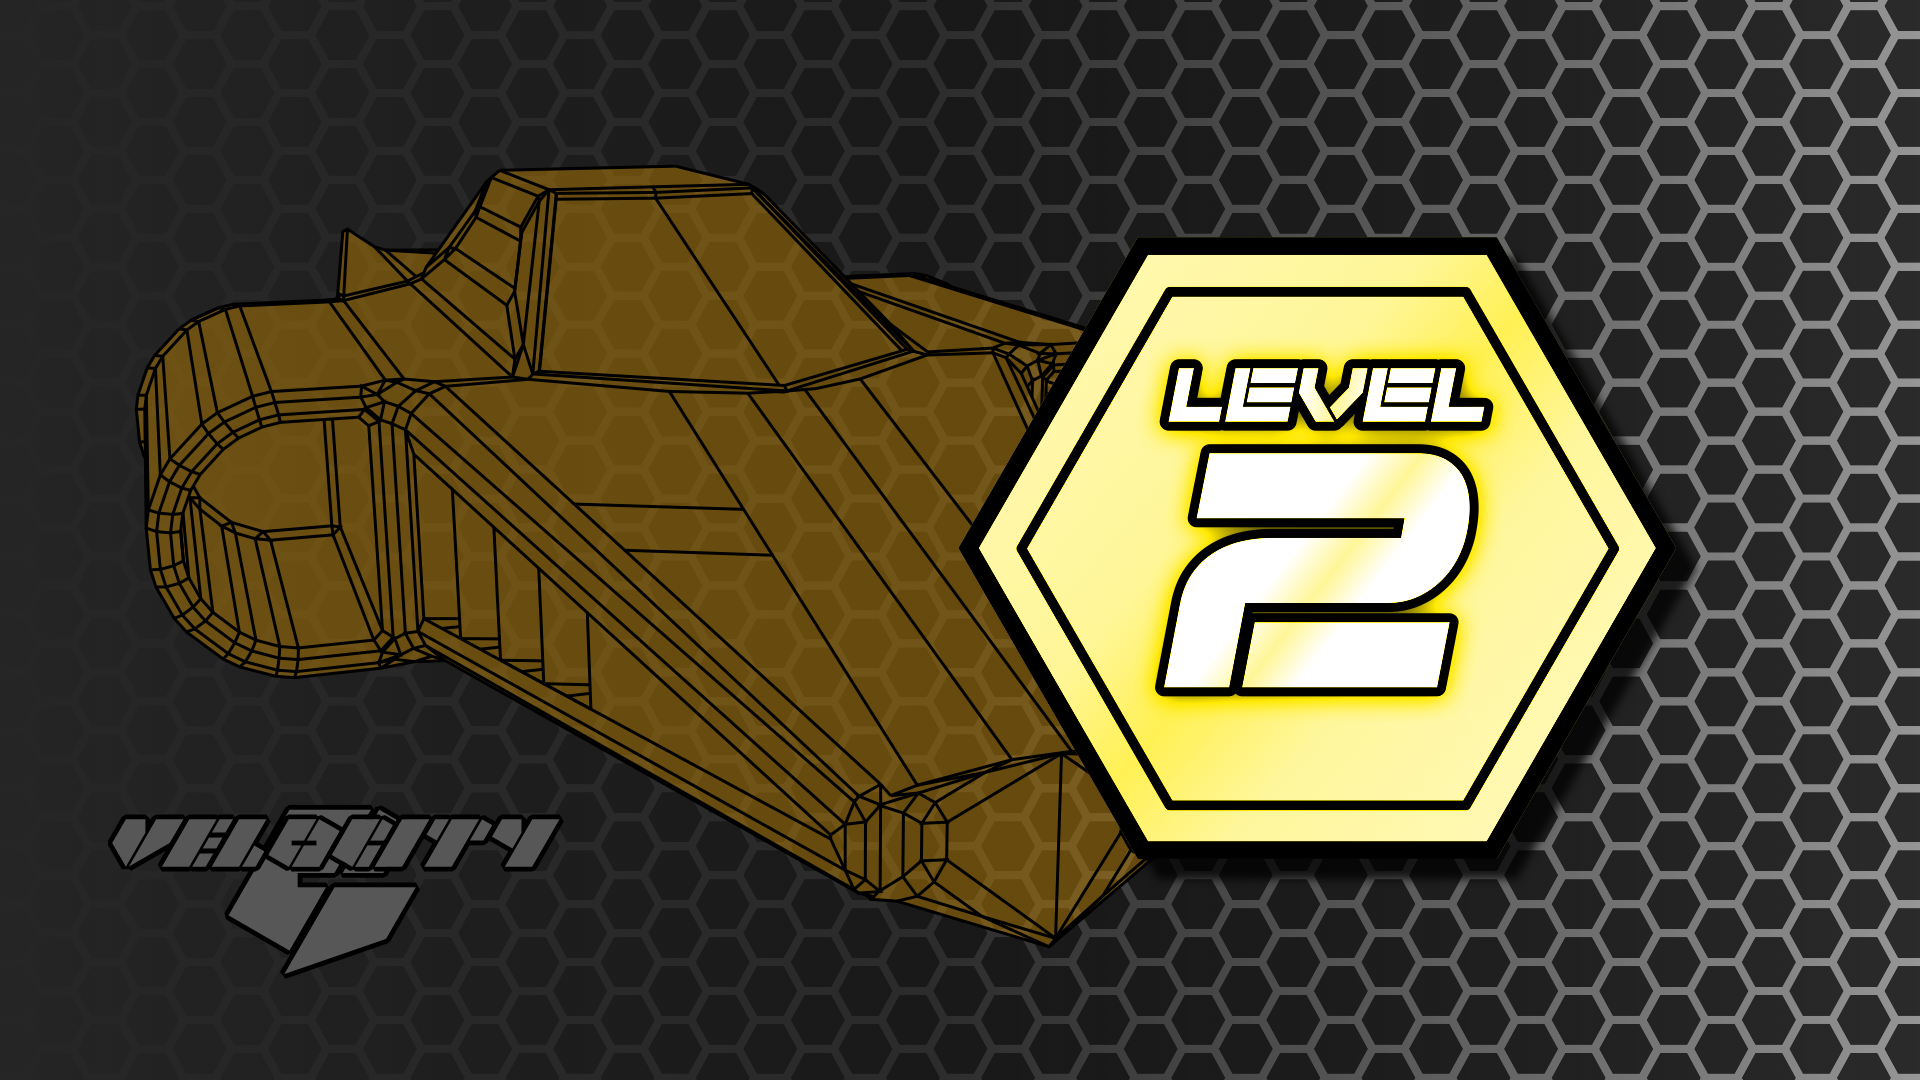 Icon for Reach level 2